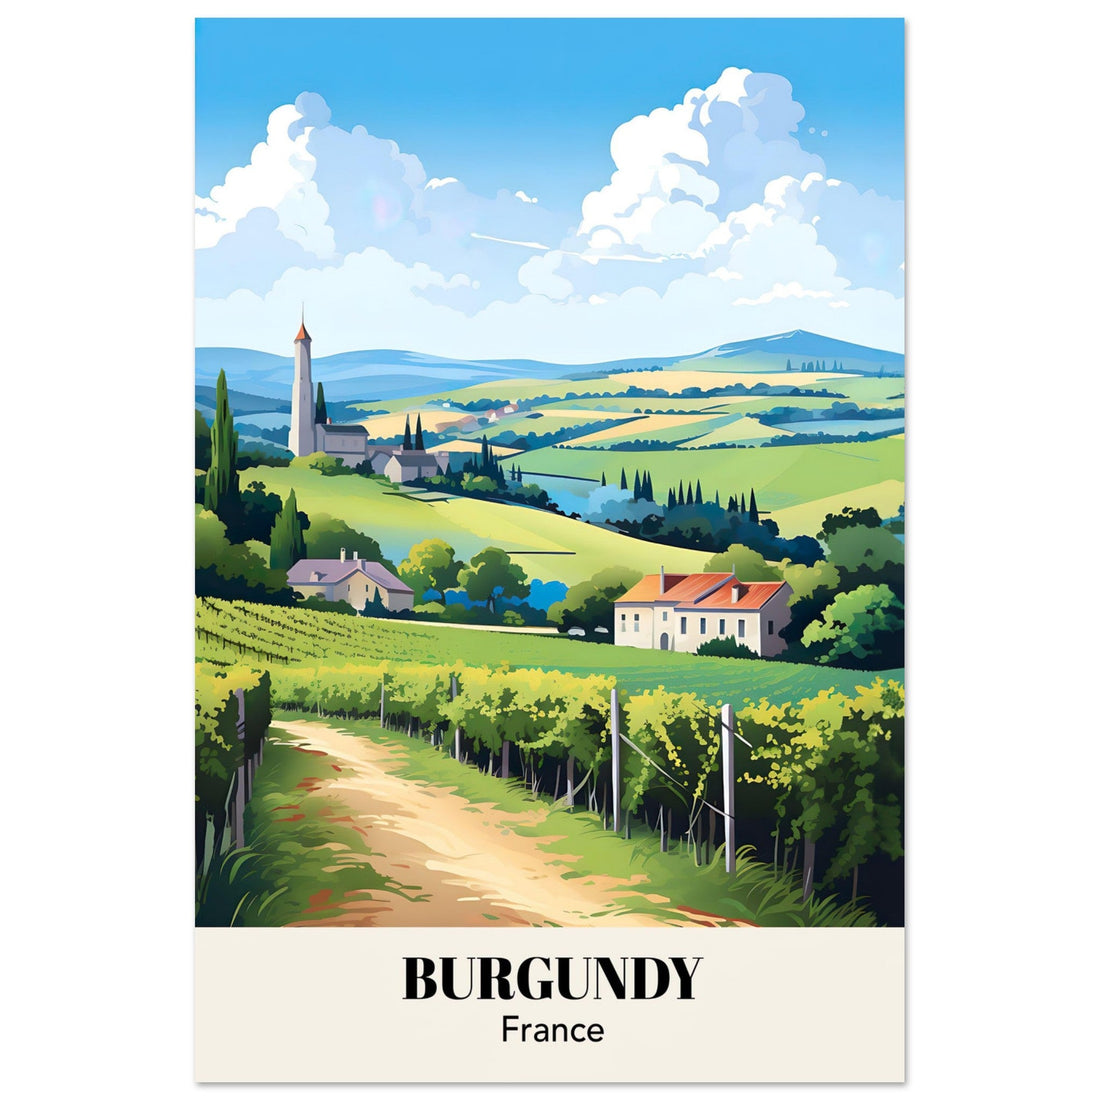 France | Burgundy Retro French County-side Travel Poster | Vintage Wall Art | Colorful Travel Print - Art Of Whim